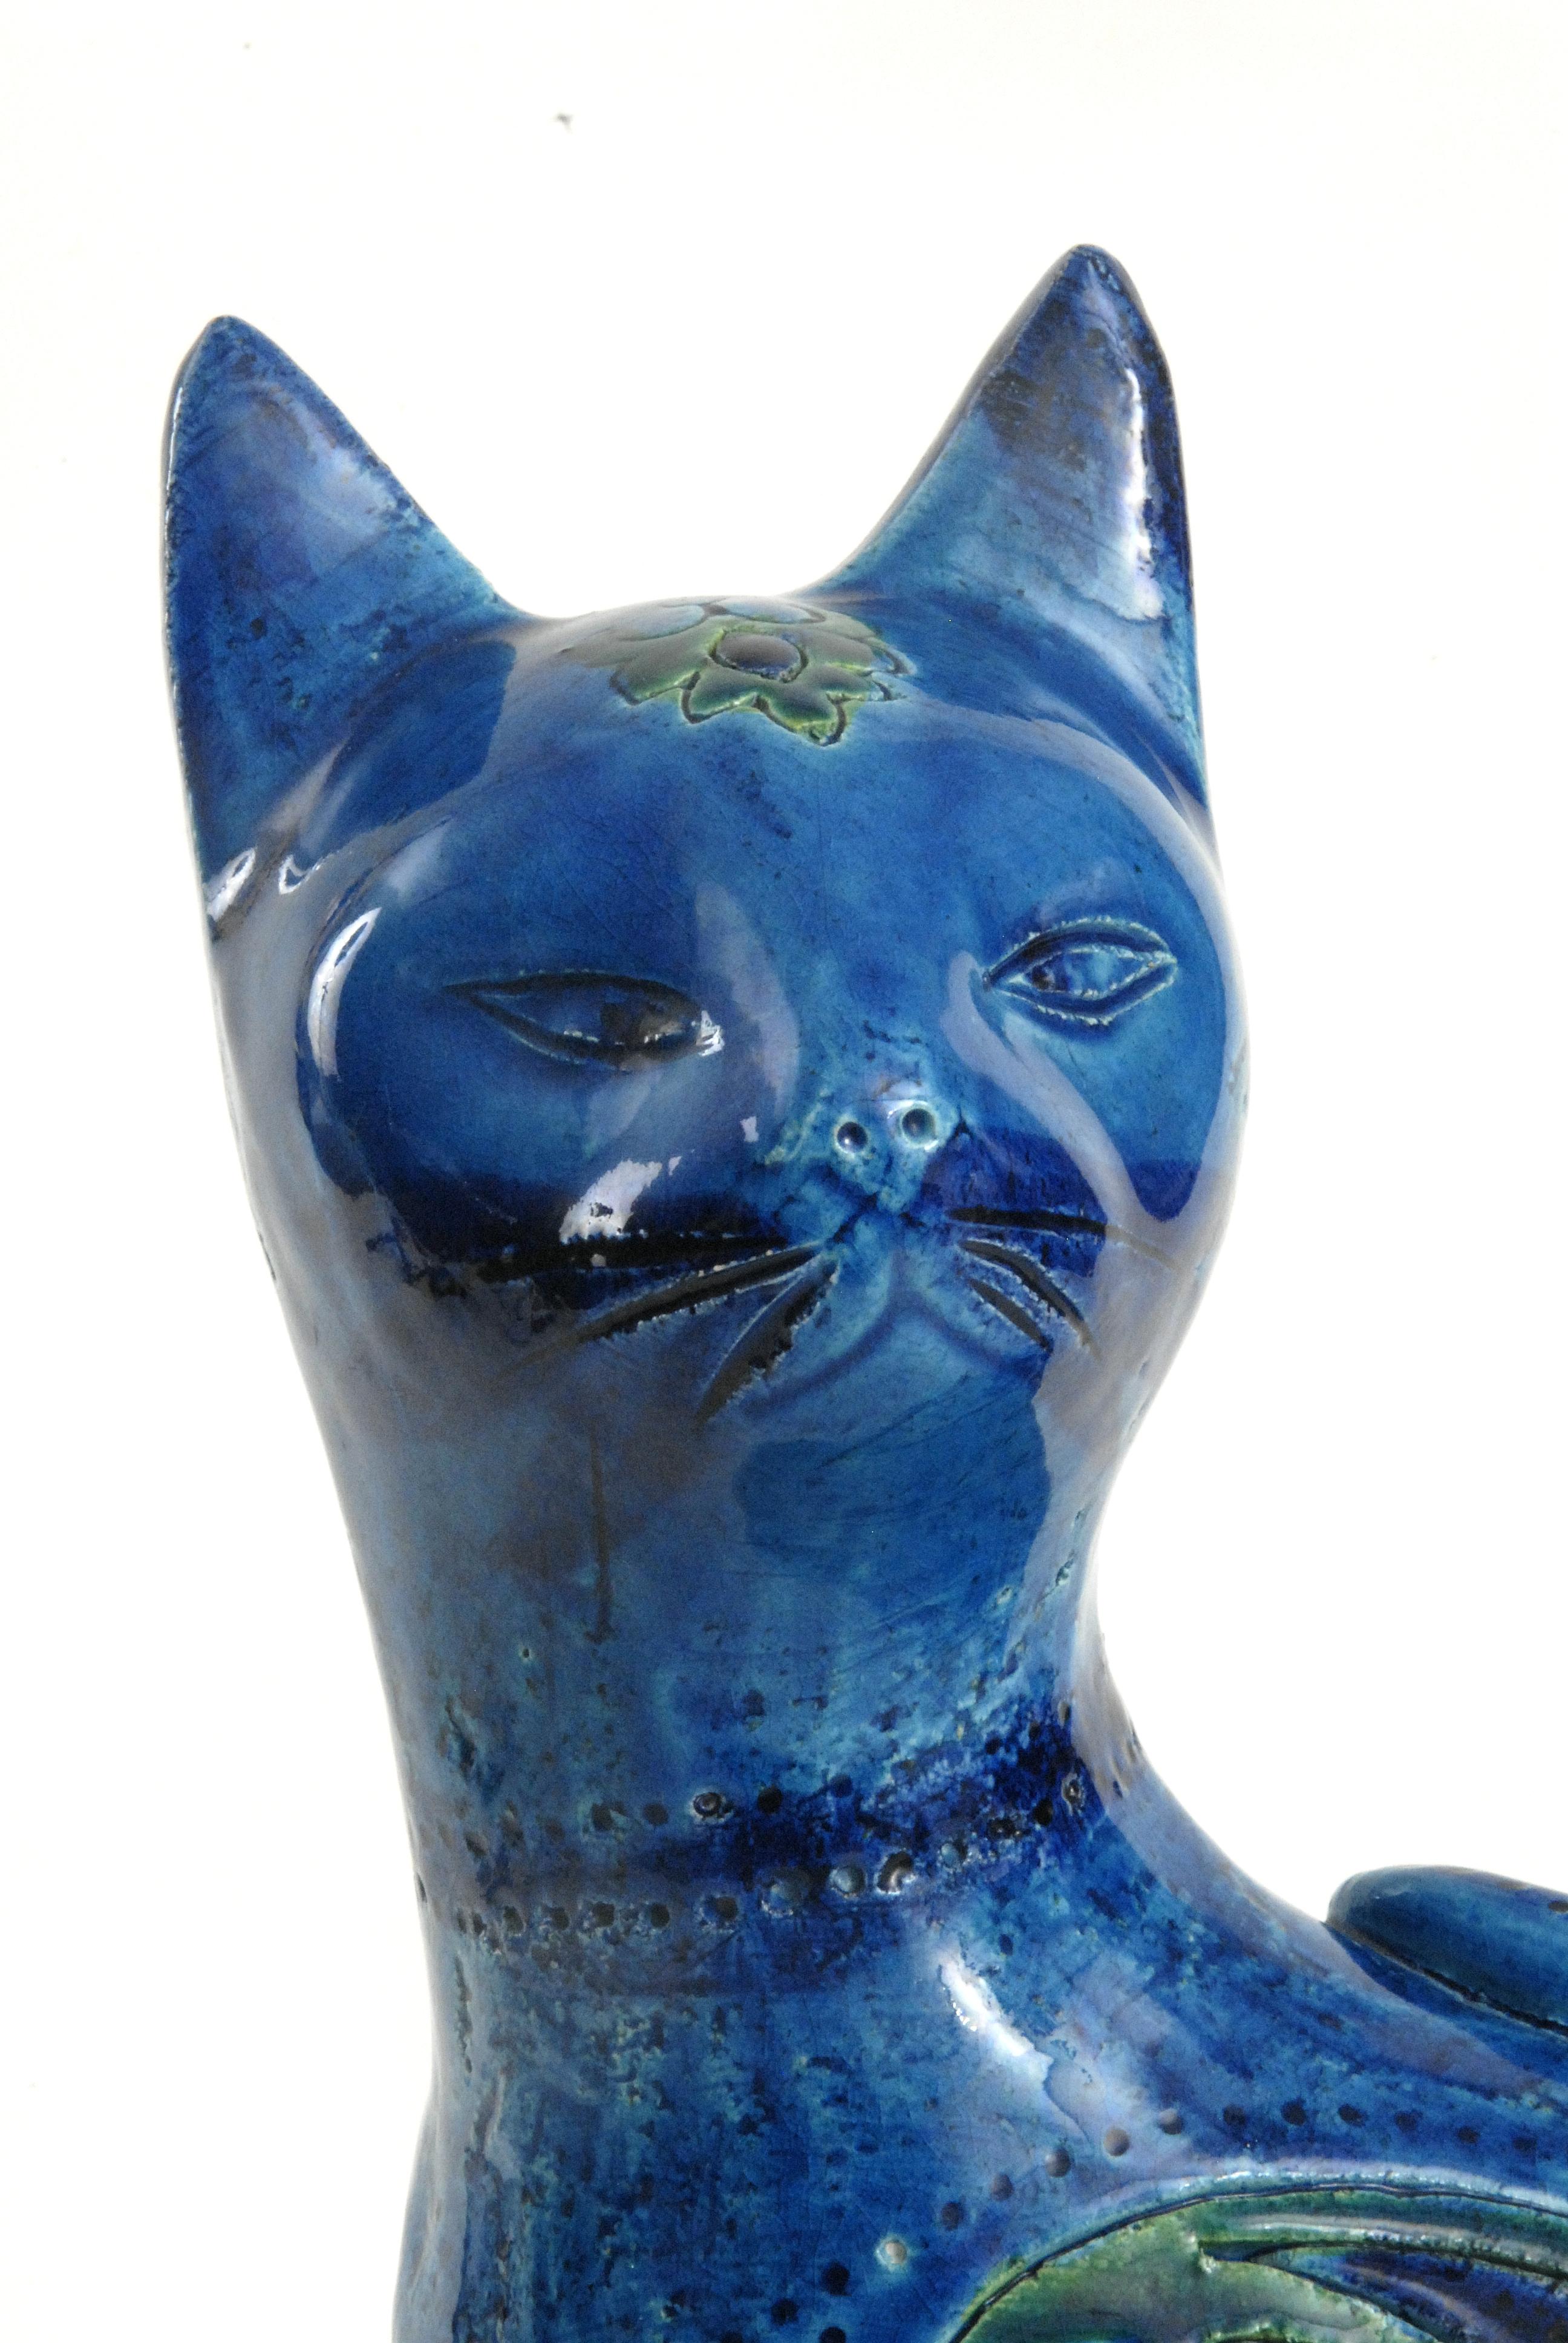 A brilliant blue glazed sitting cat with impressed paisley shaped motifs called the 'Liberty' pattern. Designed by Aldo Londi for Bitossi in the 1960s.